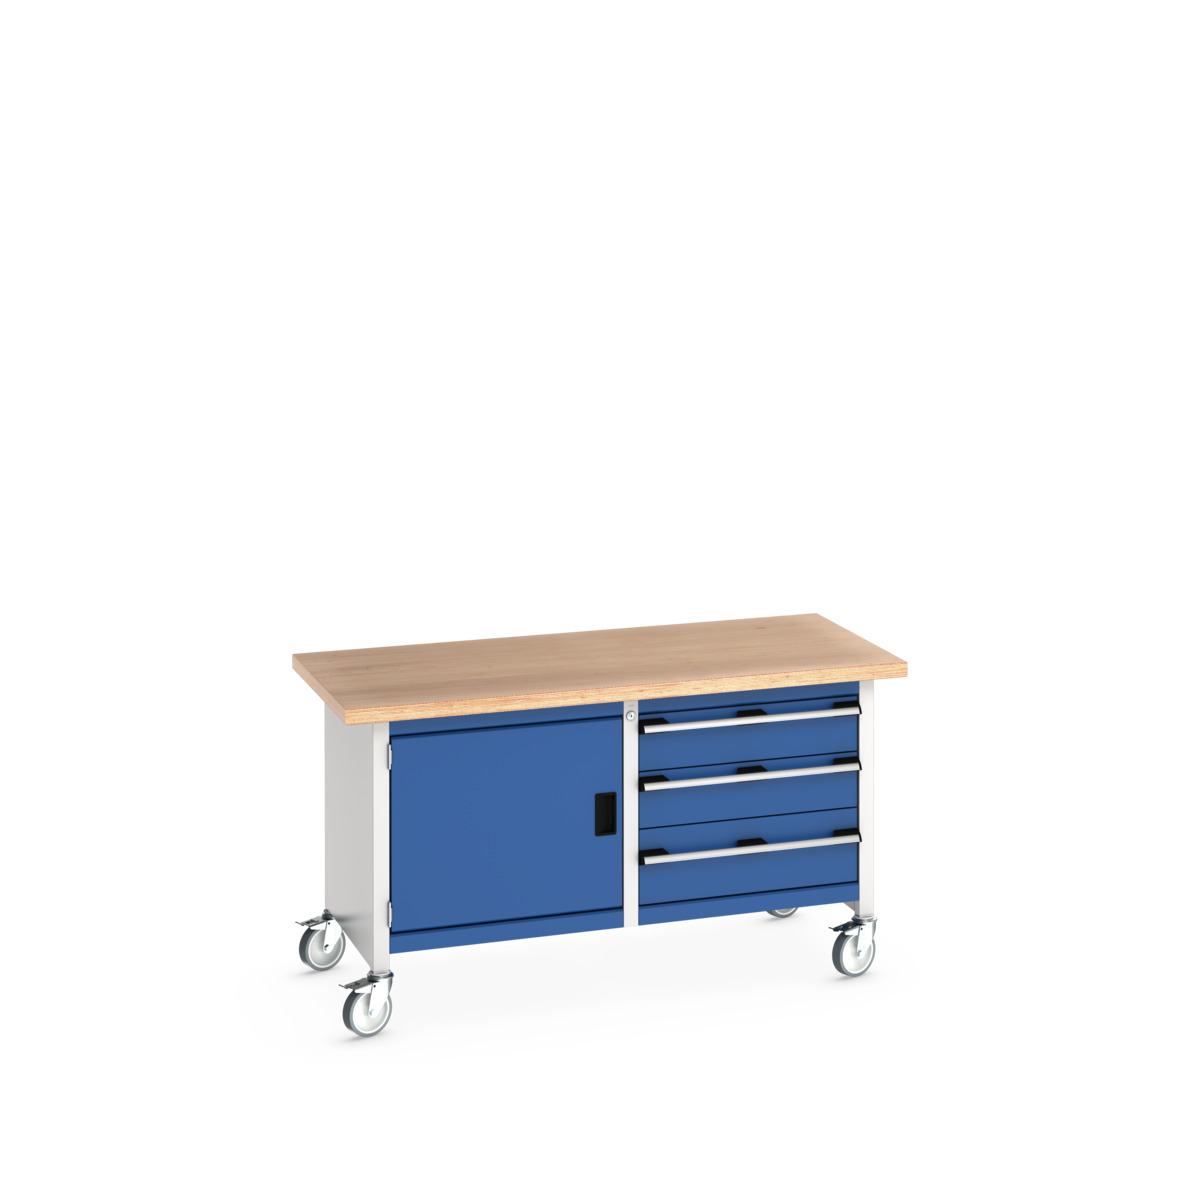 41002100.11V - cubio mobile storage bench (mpx)